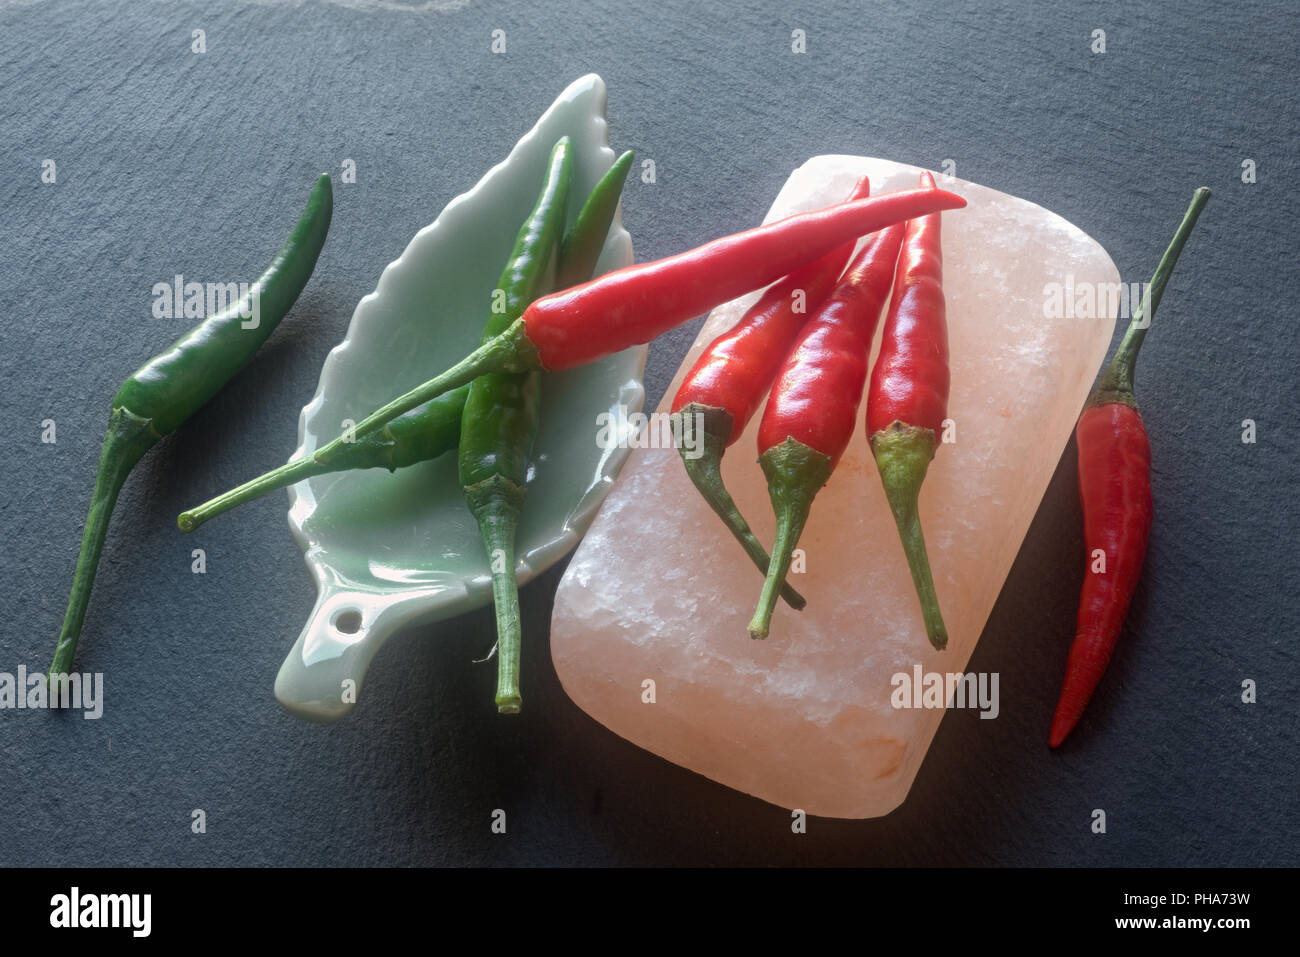 Red and green chilis; rock salt Stock Photo